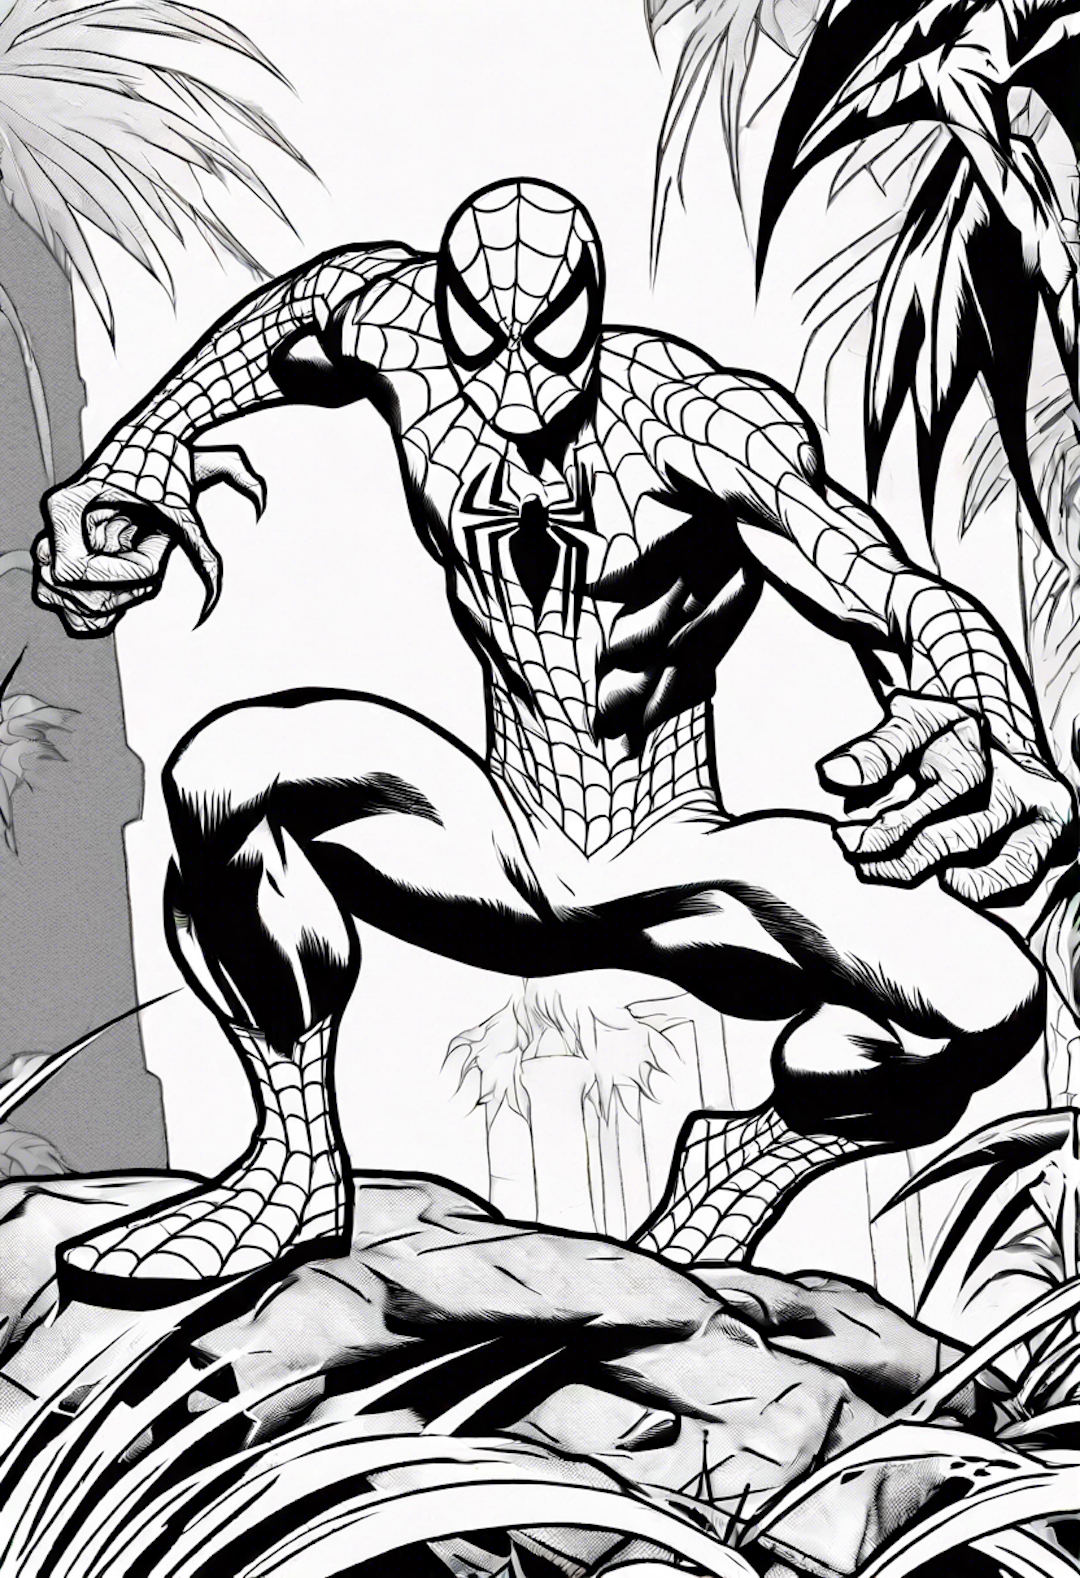 Spiderman In A Fight With Kraven The Hunter In The Jungle